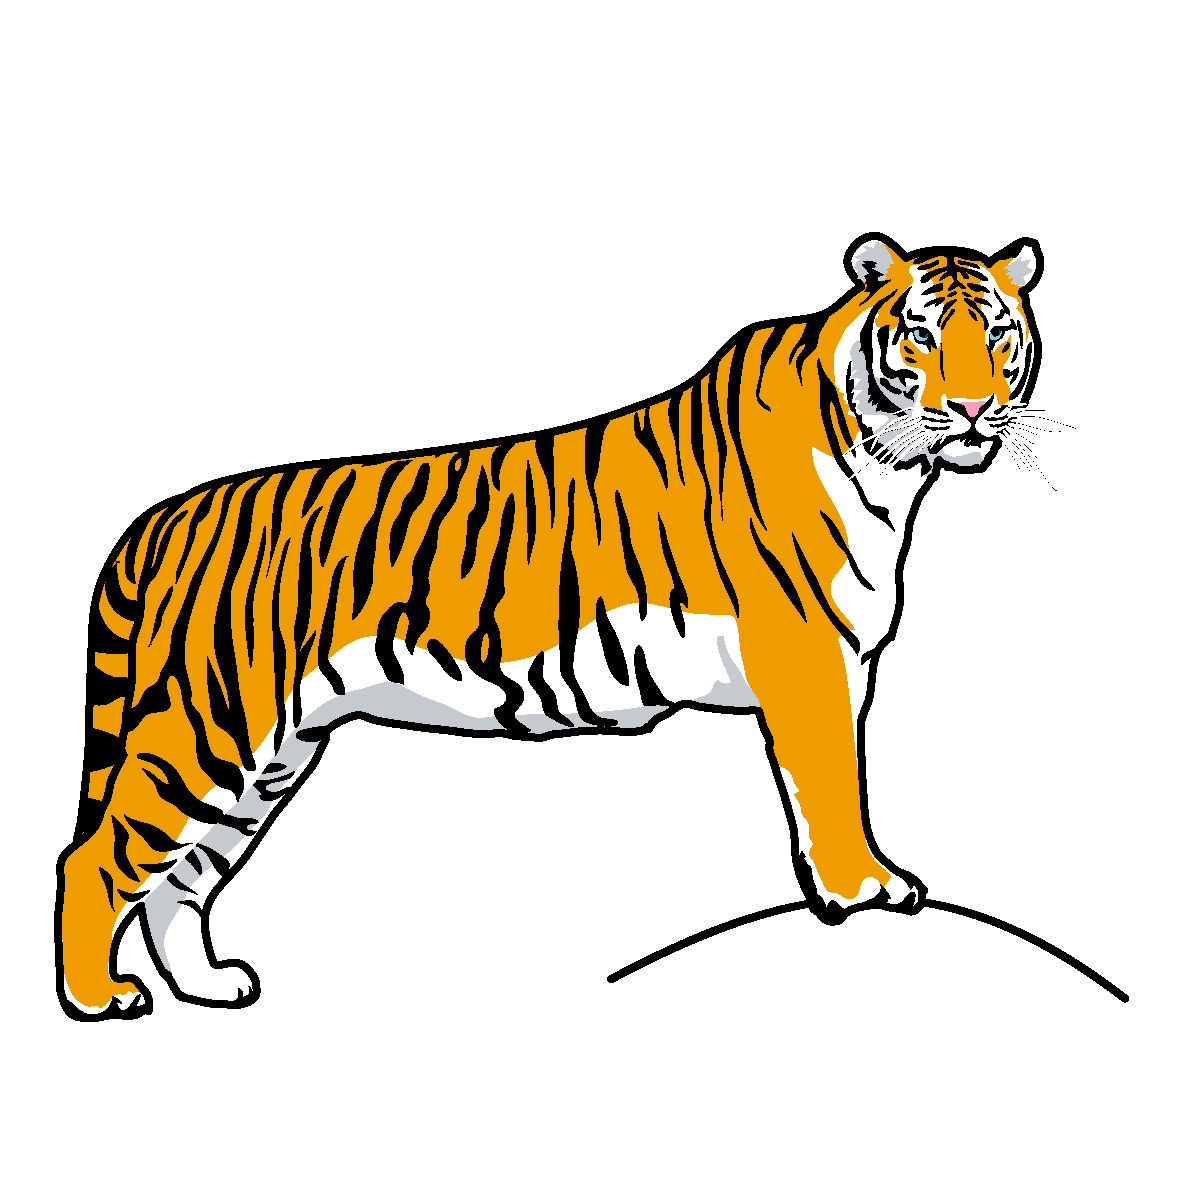 Tiger Images Free Download Clipart